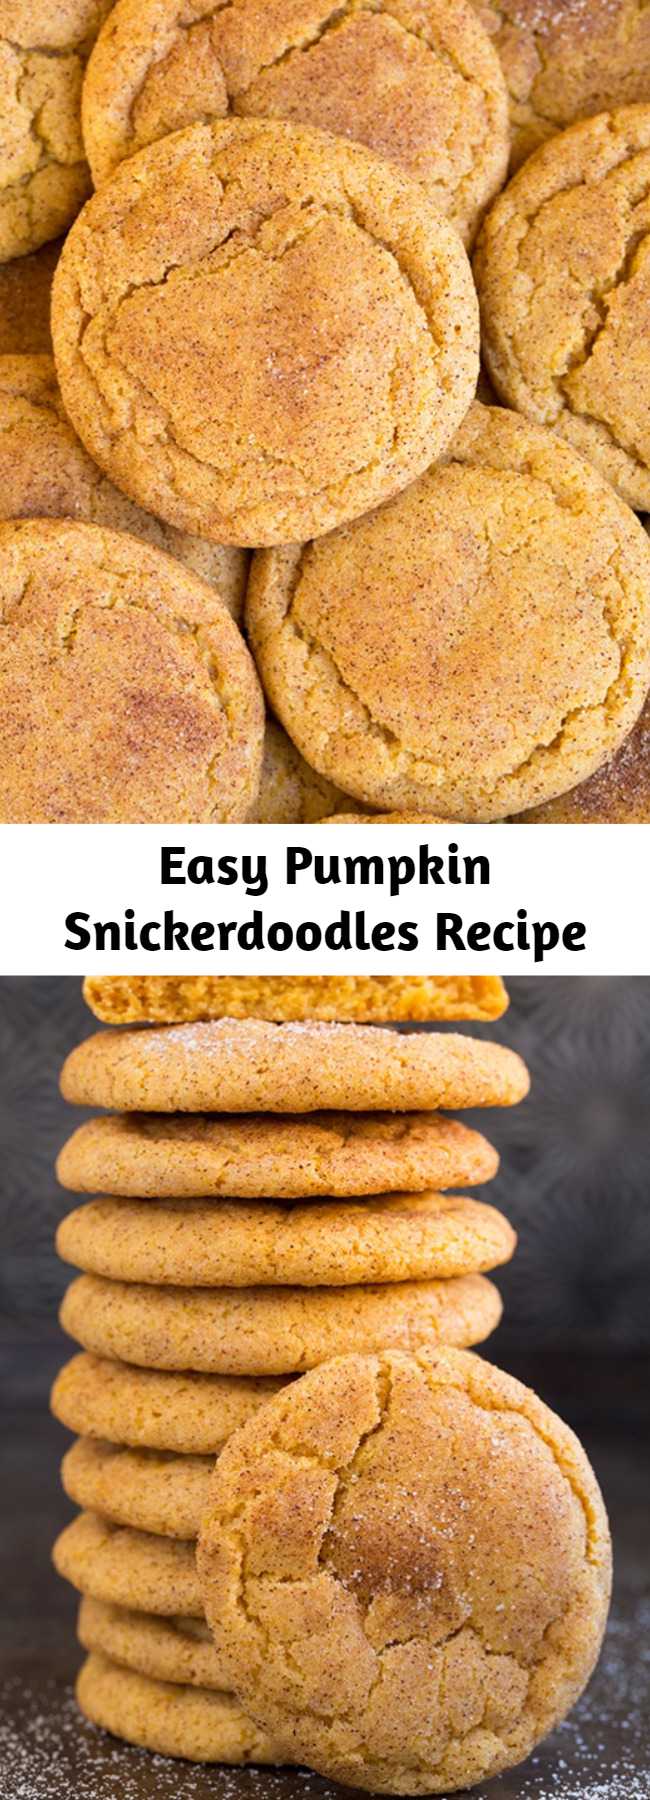 Easy Pumpkin Snickerdoodles Recipe - Easy and Irresistible pumpkin Snickerdoodles. Two of the worlds best cookies in one! Soft and tender and deliciously flavorful!